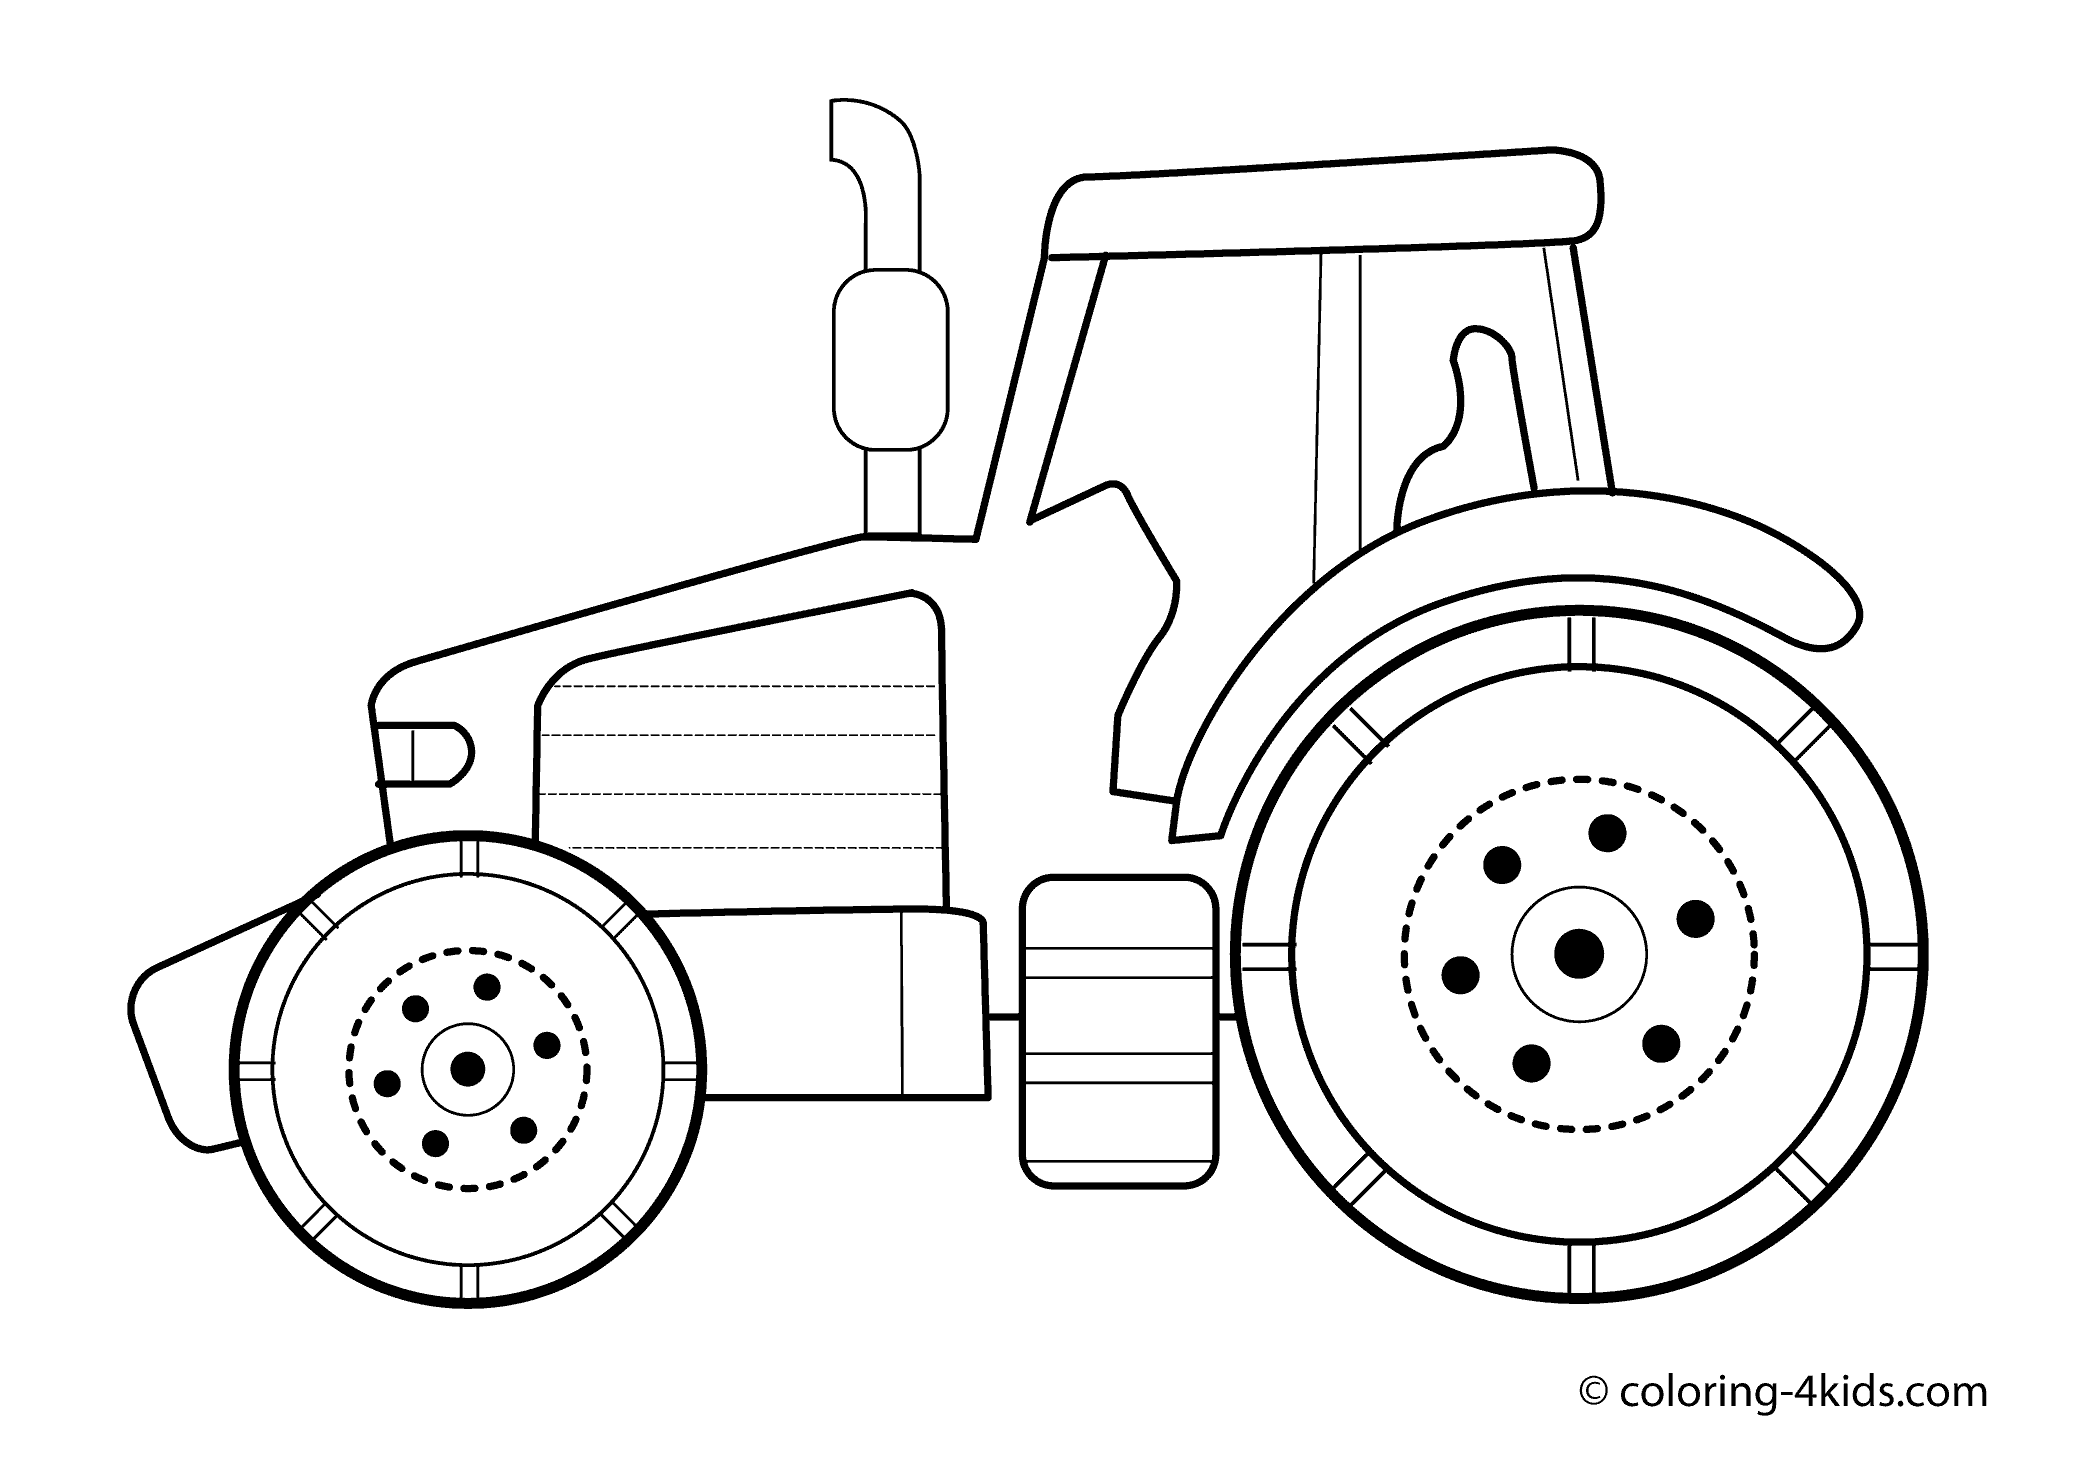 tractor-coloring-download-tractor-coloring-for-free-2019